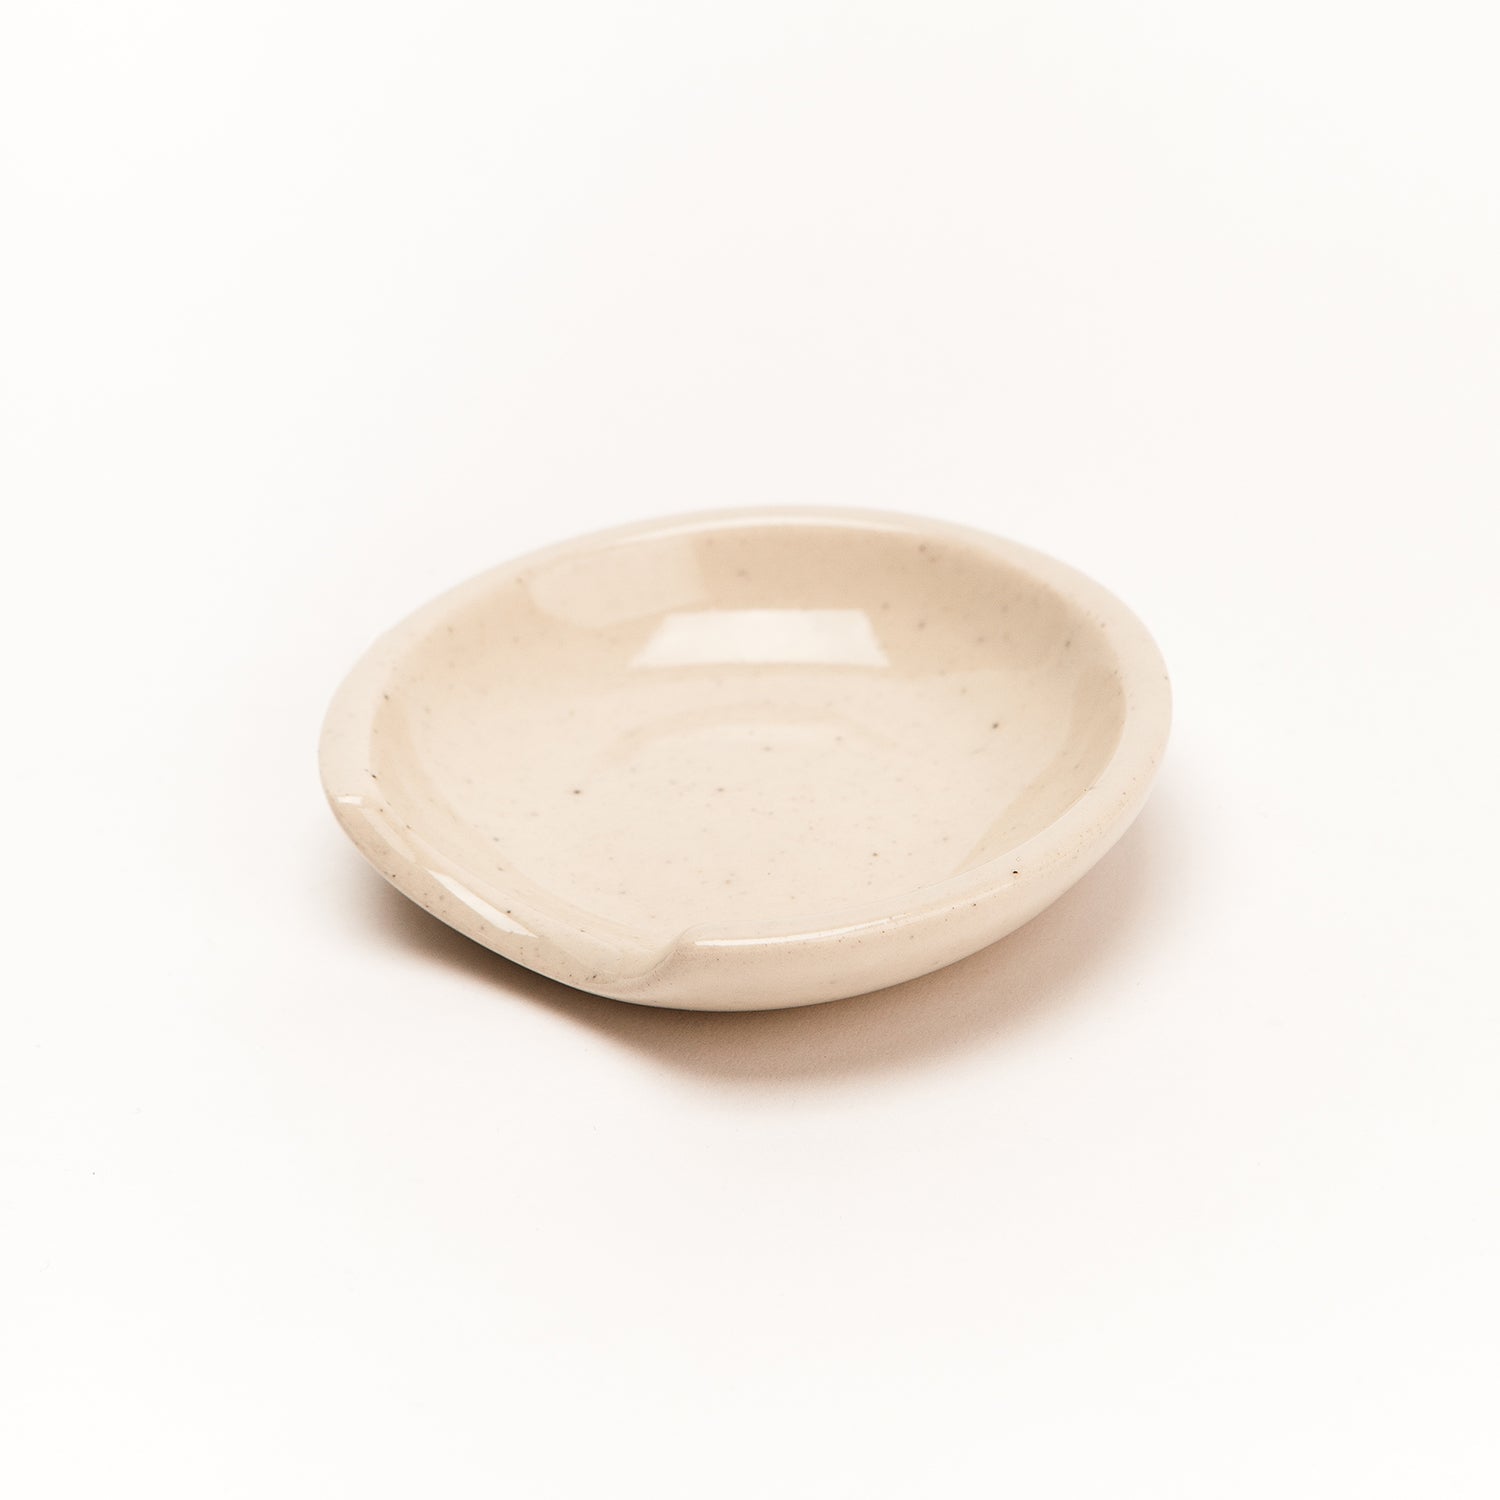 A porcelain spoon rest with a unique cut-out side perfectly cradles all shapes and sizes of kitchen tools with minimalist flair. 